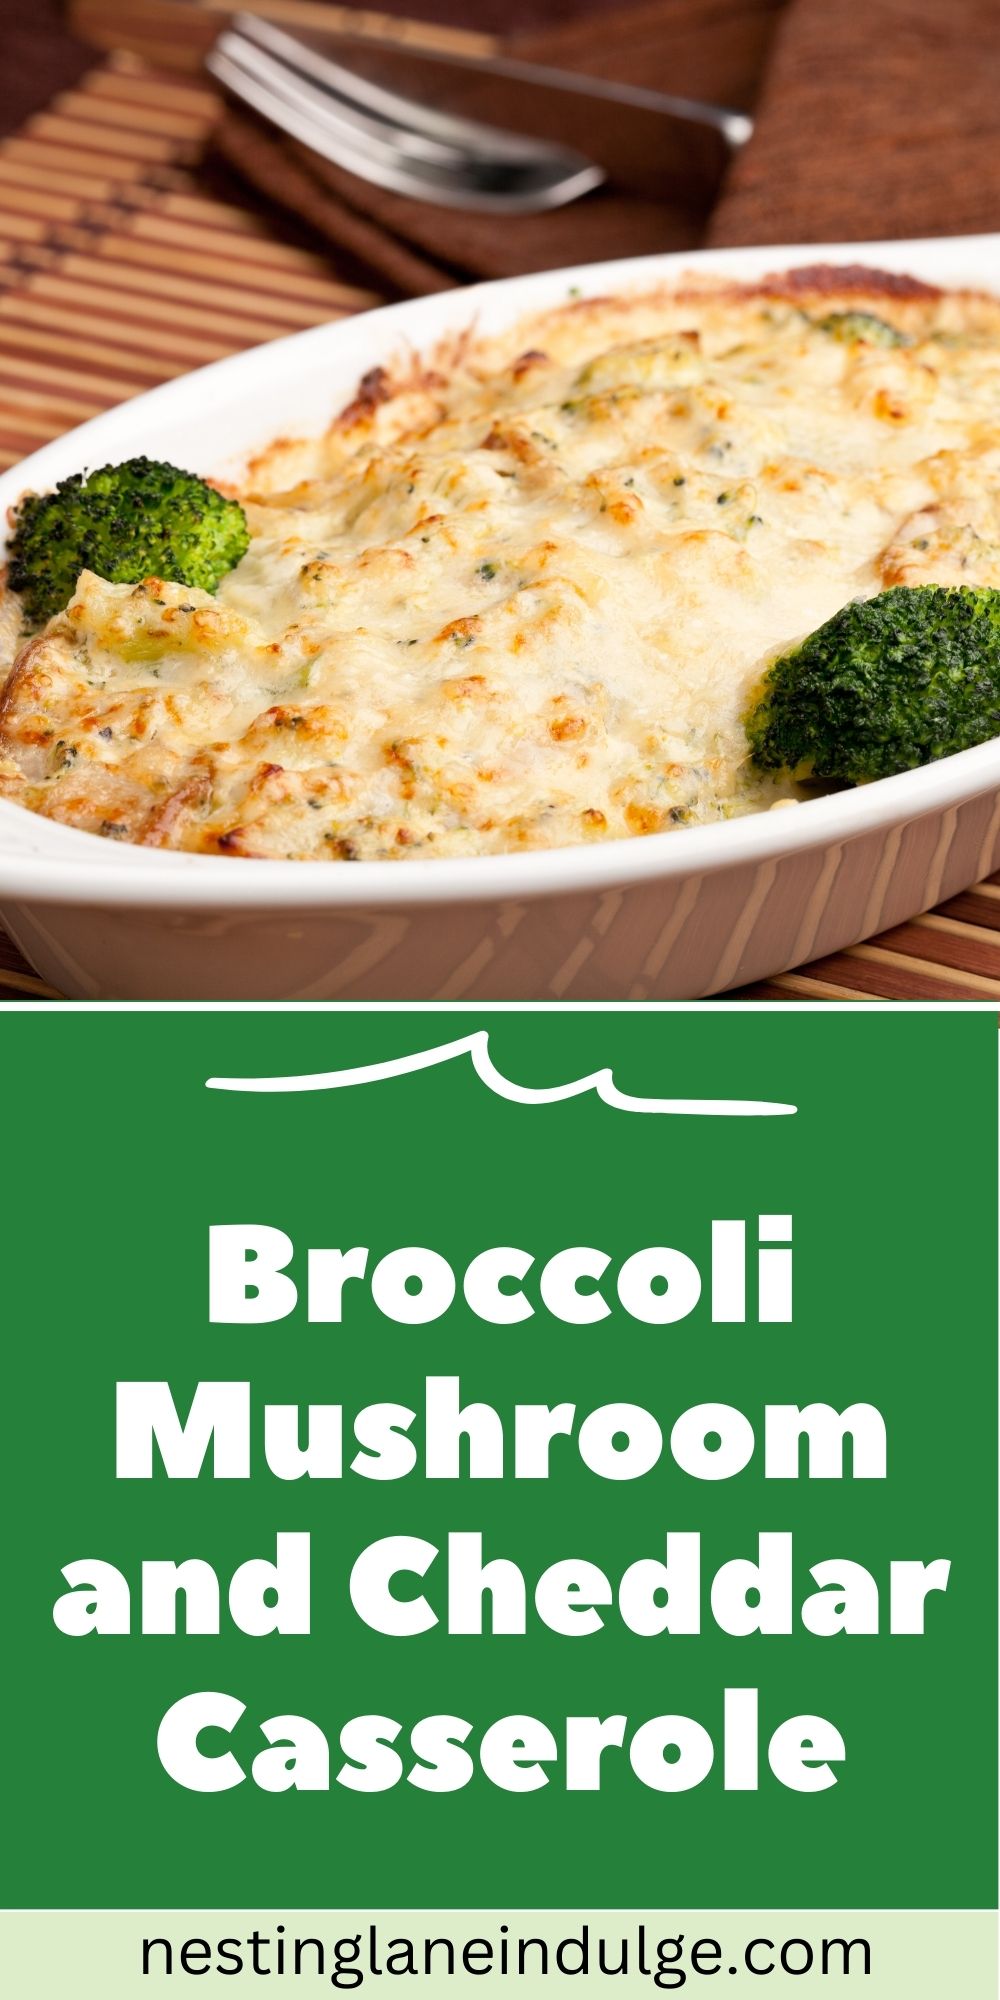 Graphic for Pinterest of Ultimate Broccoli Mushroom and Cheddar Casserole Recipe.